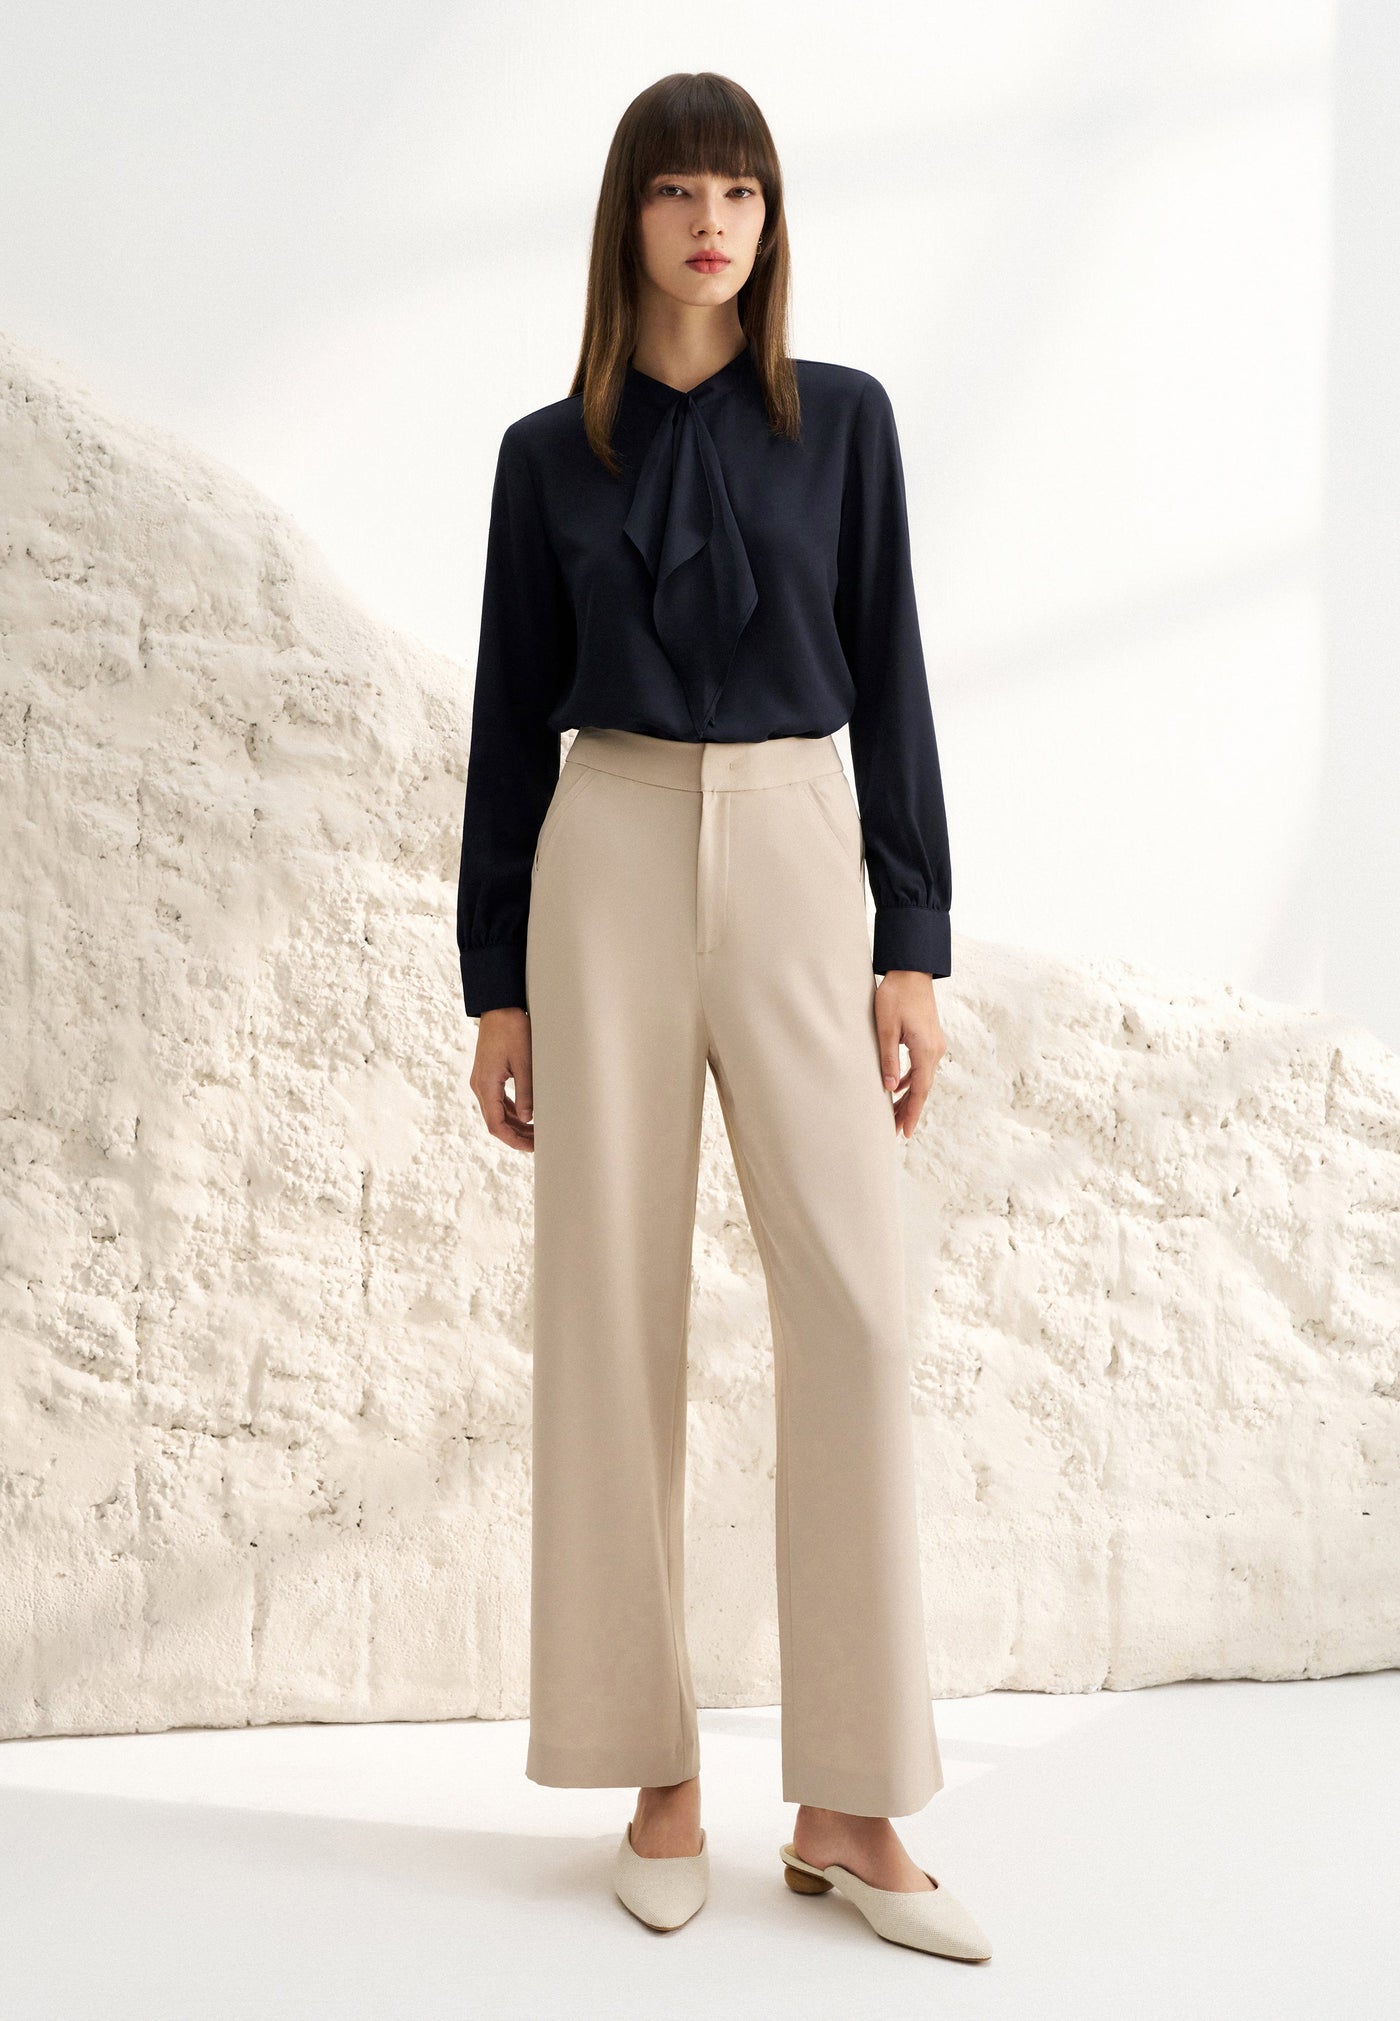 Women Clothing Dobby Twill Pants Relaxed Fit